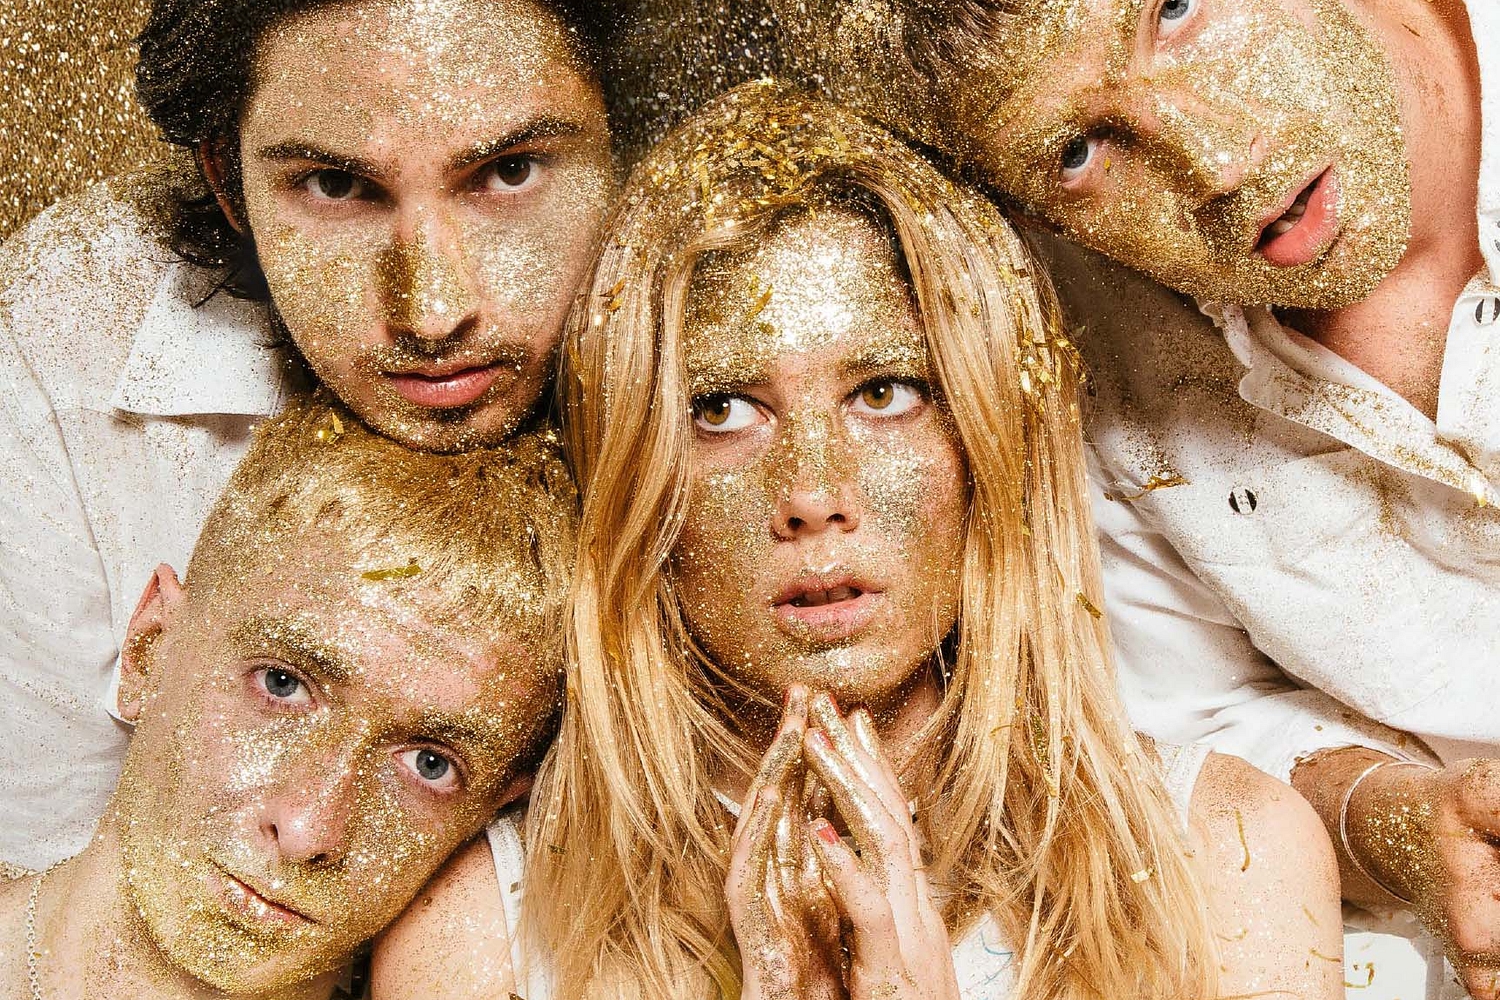 Wolf Alice, Soak, Jamie xx and more nominated for Mercury Prize 2015